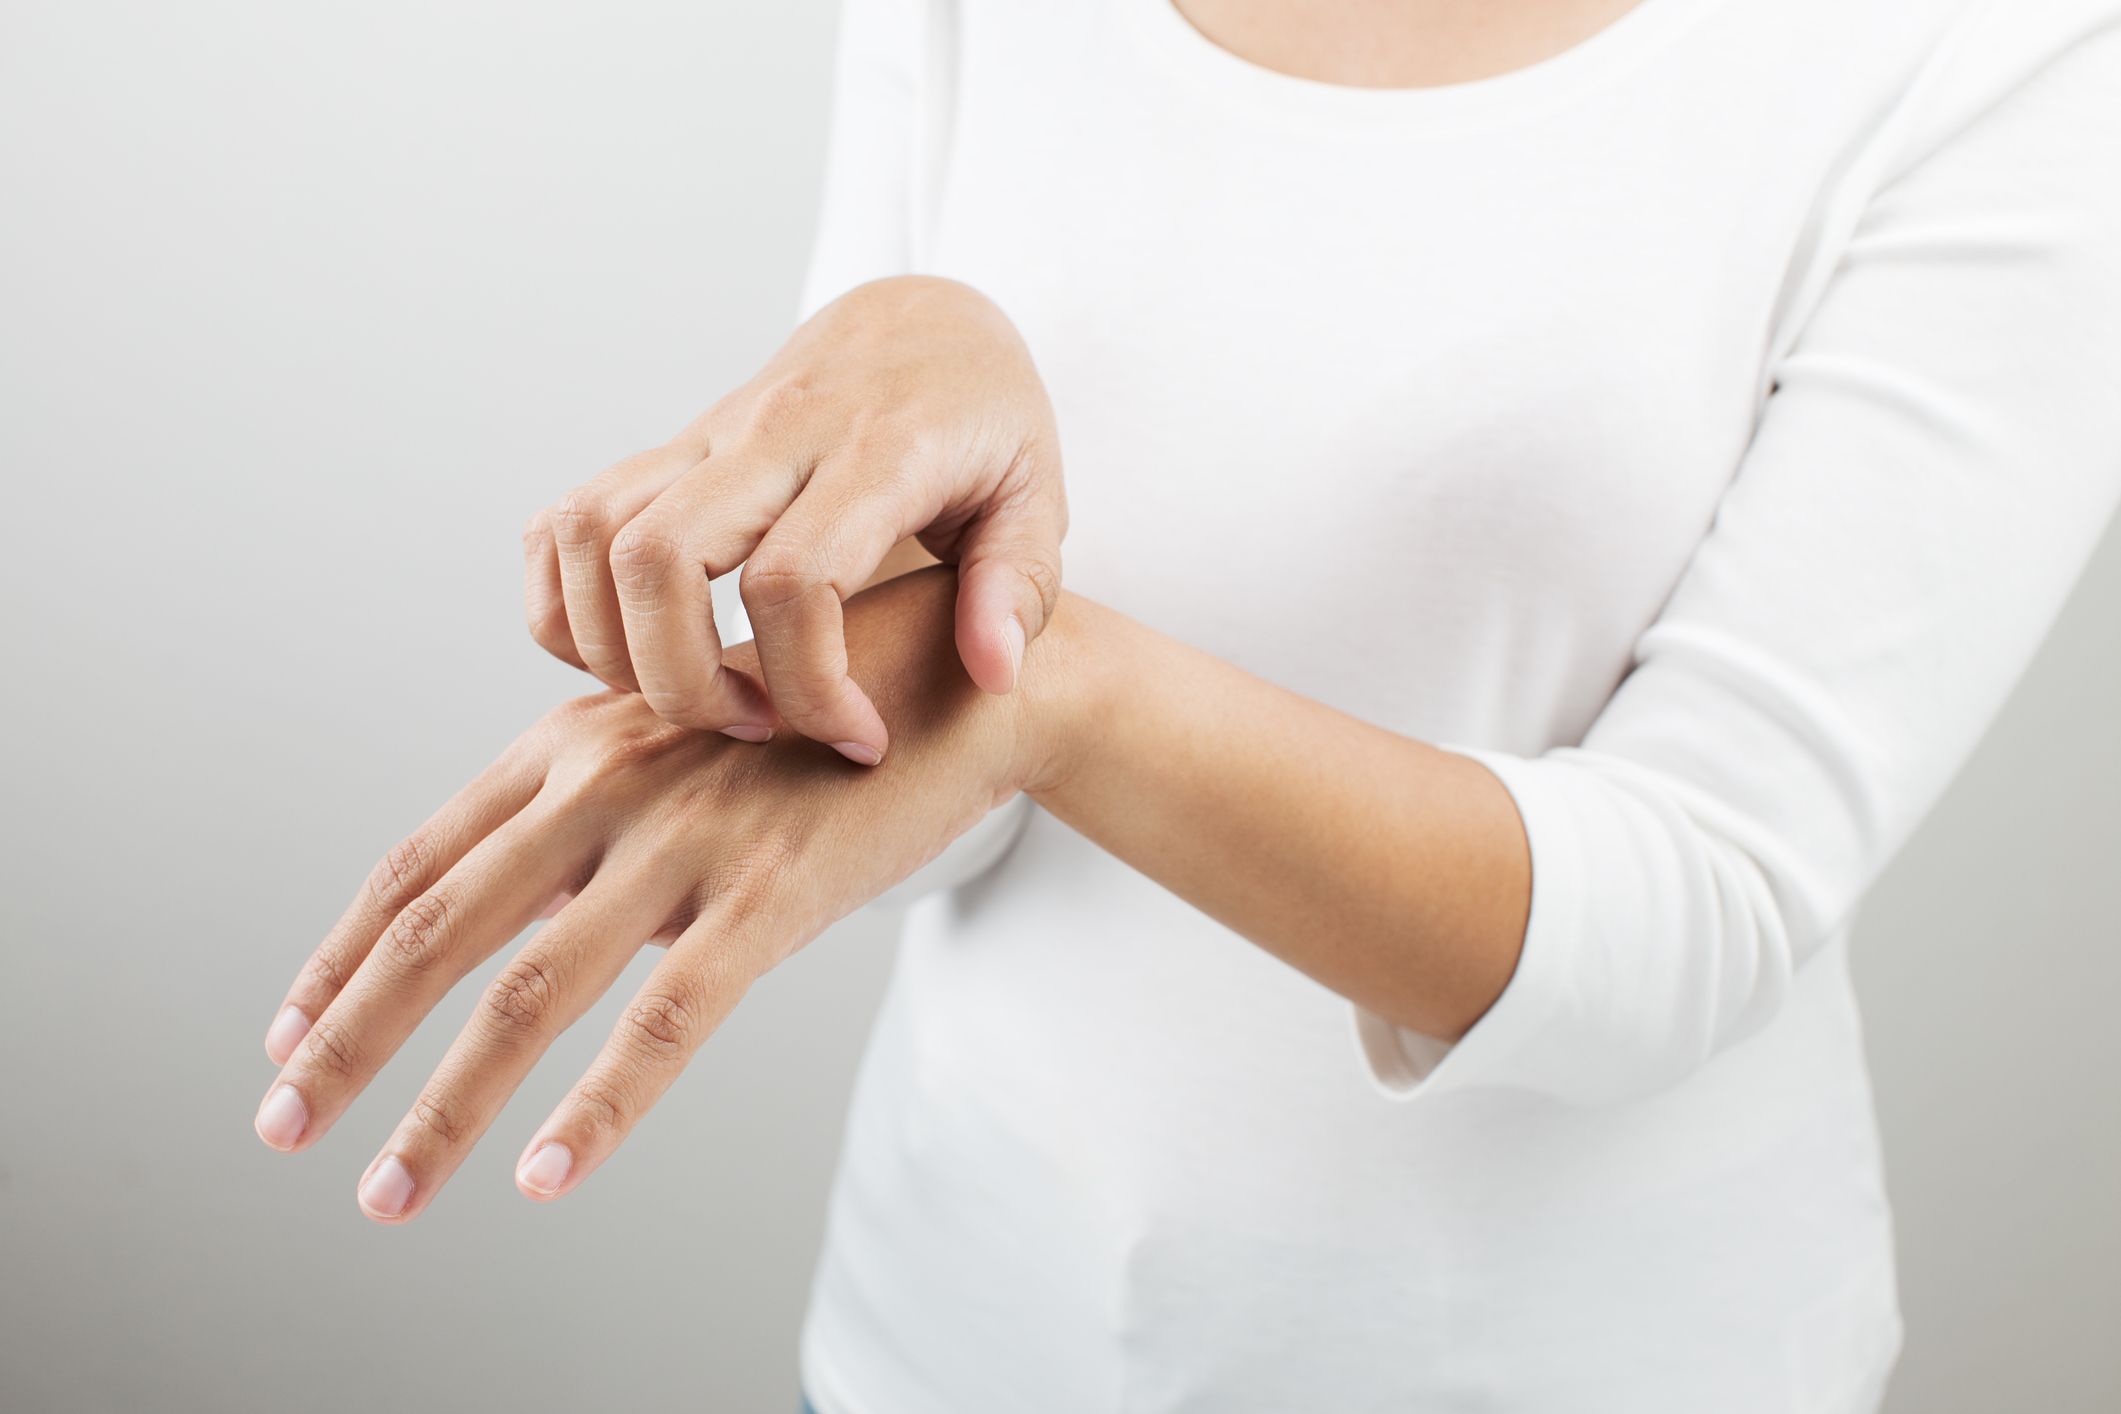 Itchy palms: 10 causes, symptoms and treatment